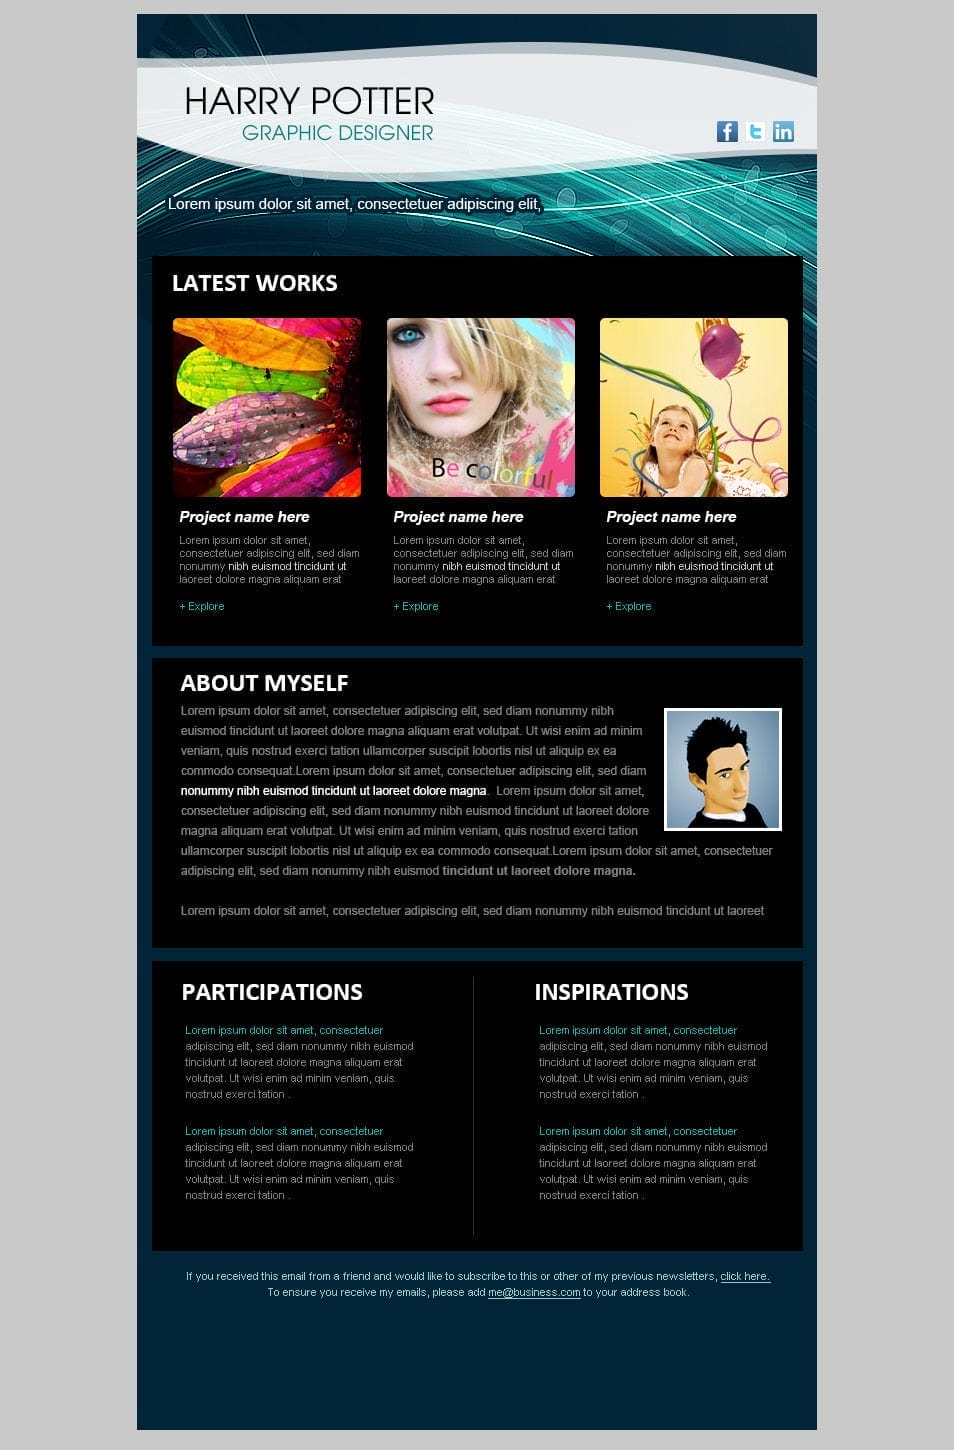 Potter Designs Free PSD Email Newsletter Template